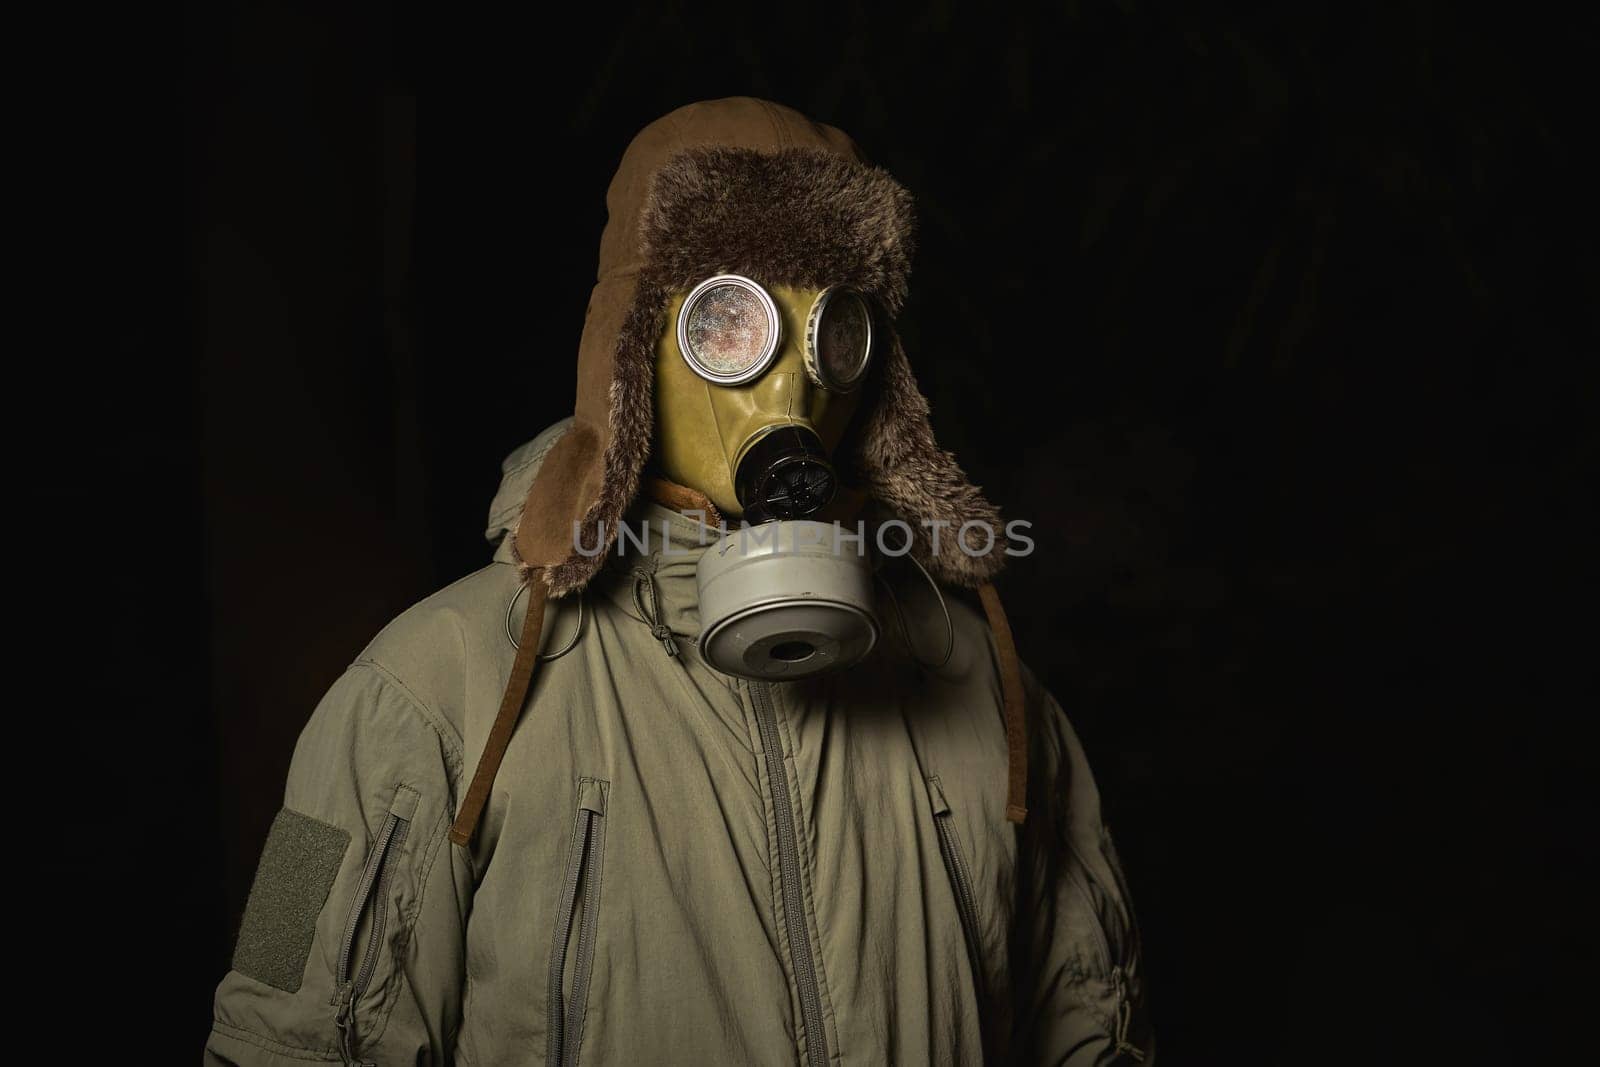 man in a gas mask protects himself from coronavirus at night